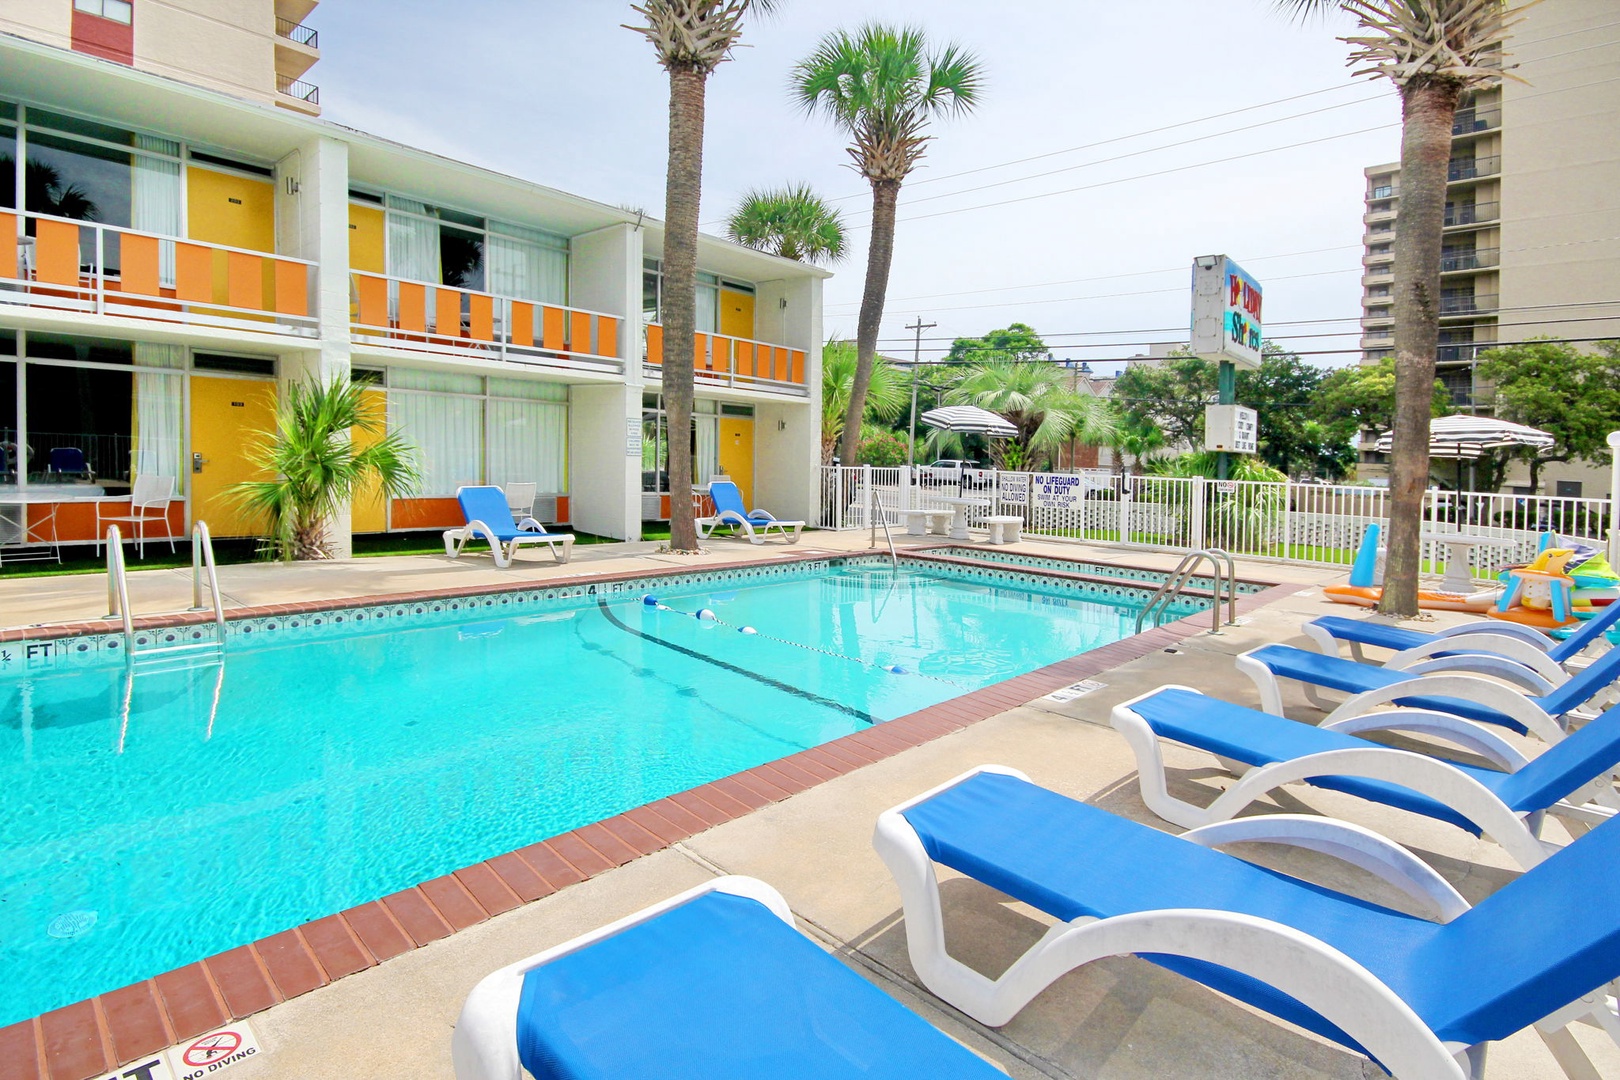 furnished rental home in Myrtle Beach